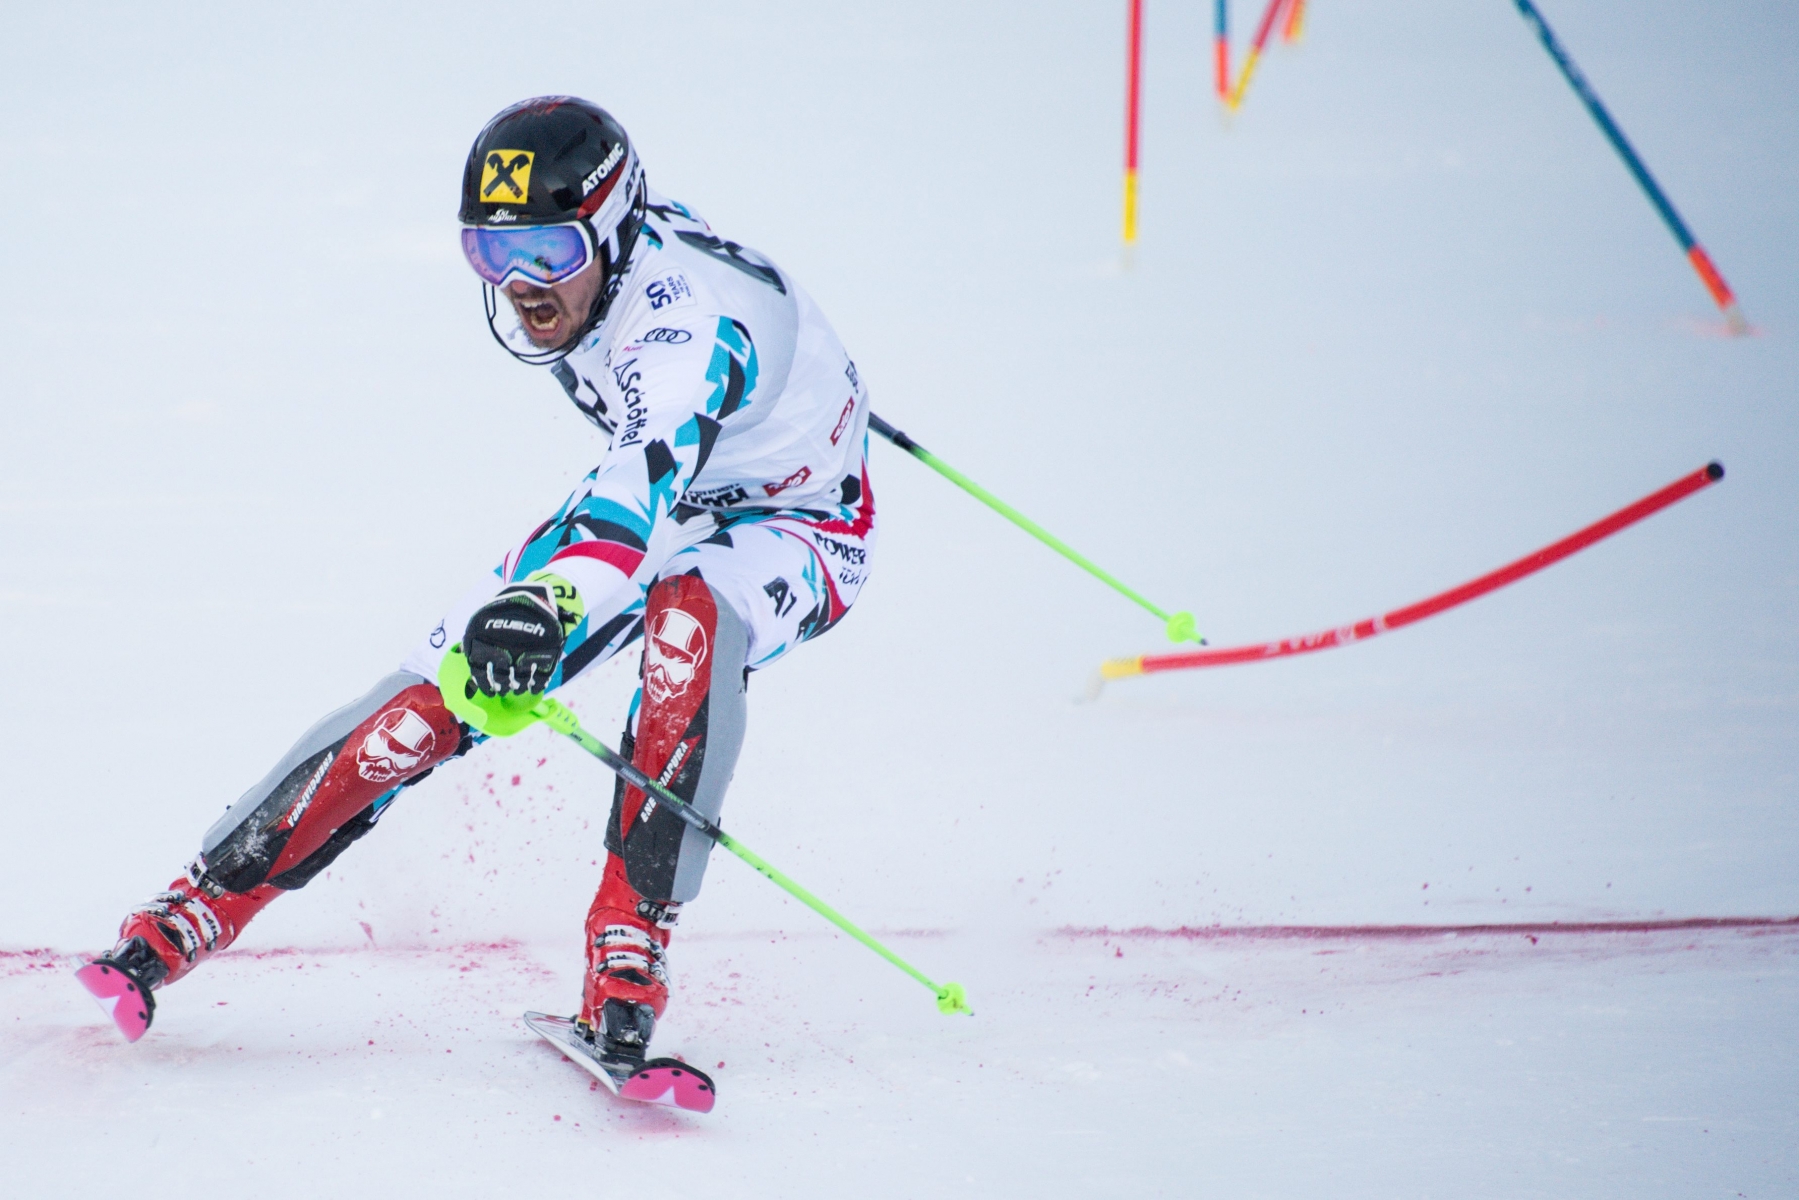 epa05741735 Marcel Hirscher of Austria crosses the finish line during the second run of the the Men's Slalom race at the FIS Alpine Skiing World Cup in Kitzbuehel, Austria, 22 January 2017.  EPA/CHRISTIAN BRUNA AUSTRIA ALPINE SKIING WORLD CUP